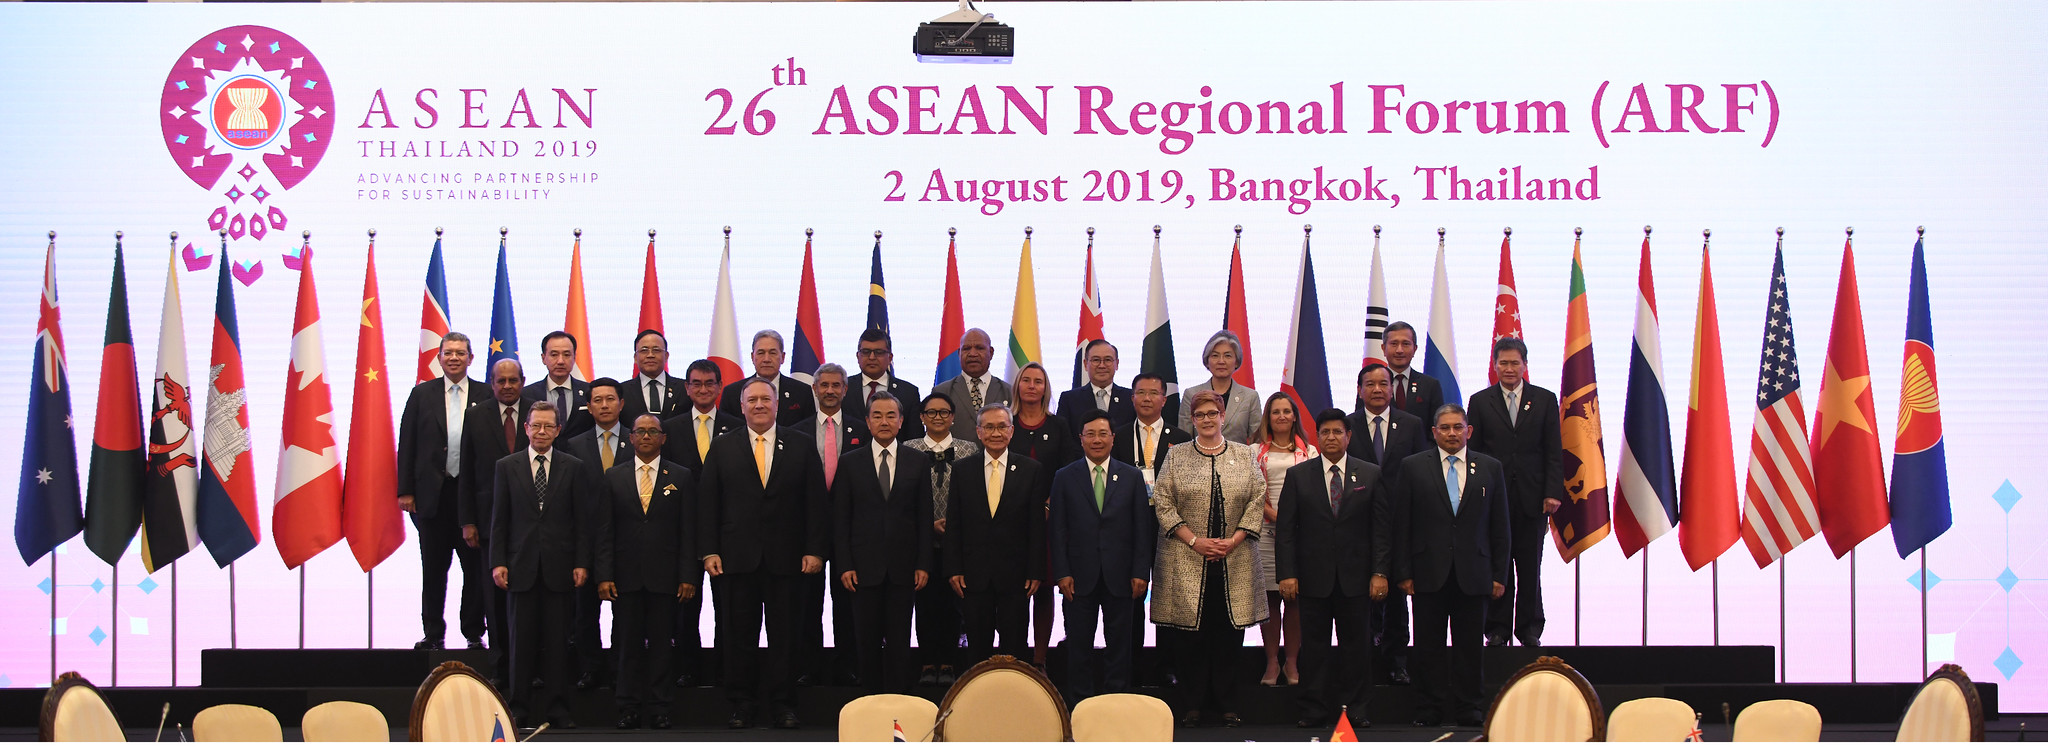 Kazakhstan-ASEAN Relations: Prospects for Greater Engagement